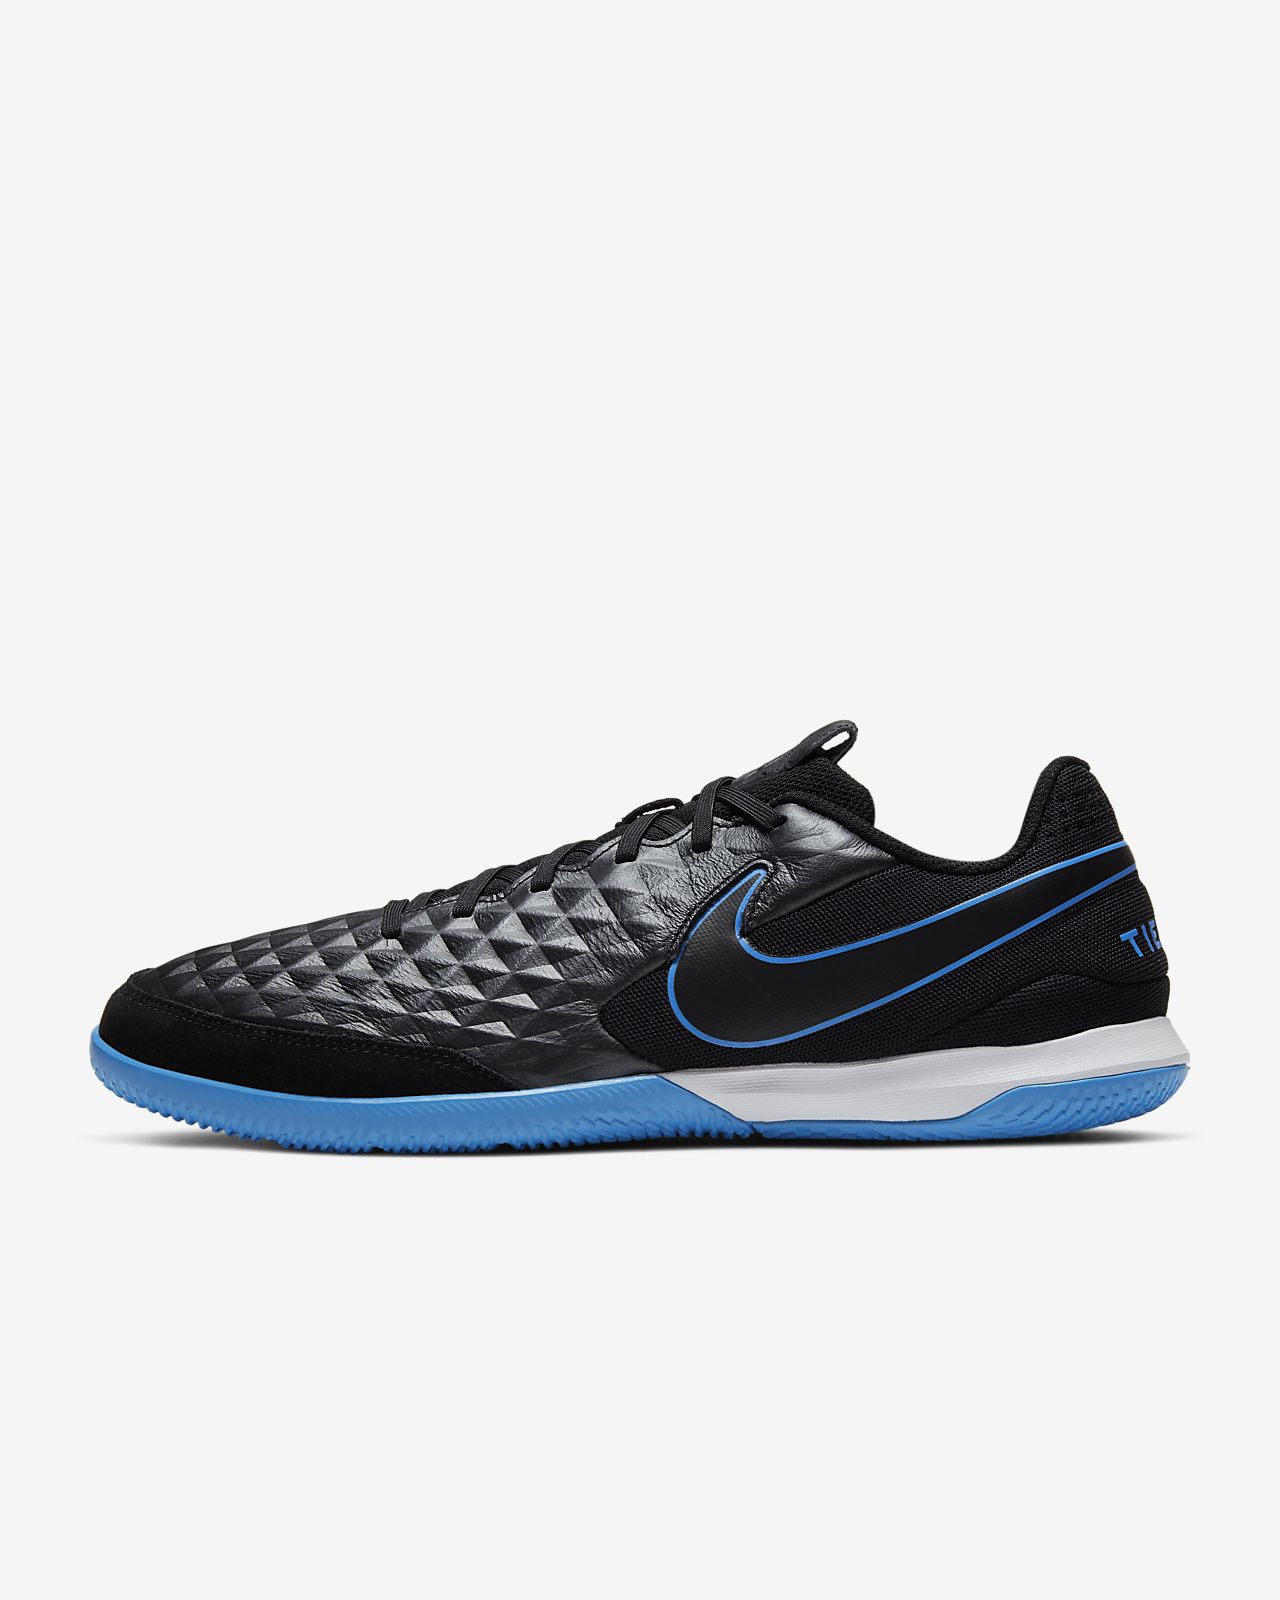 Nike Weather Legend 8 Pro IC New Hvid Gray PI Lager